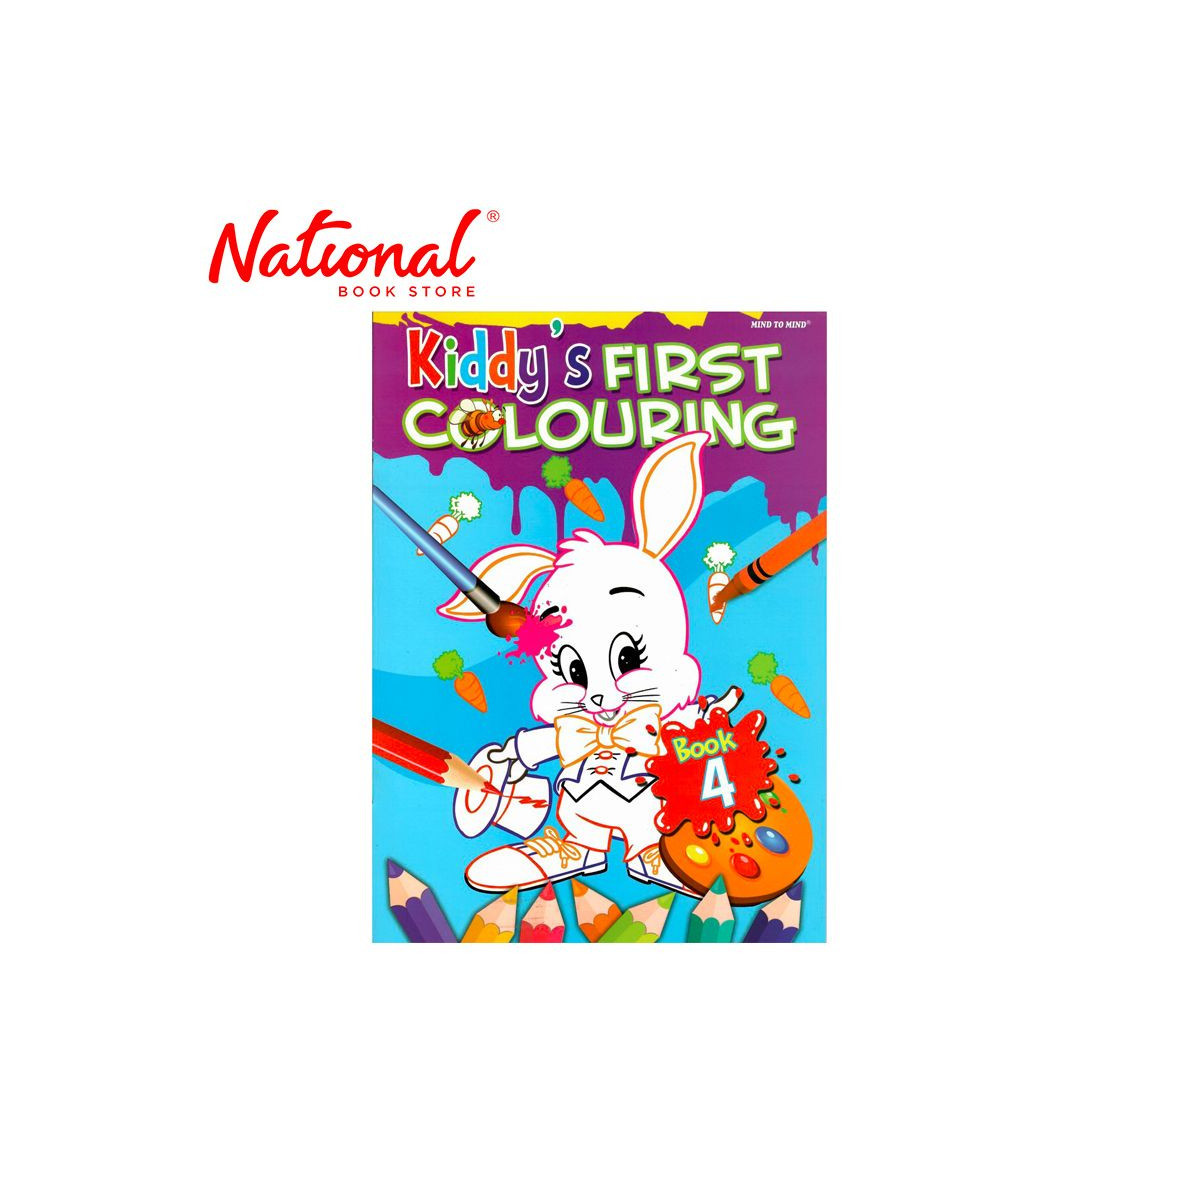 Kiddy First Colouring Book 4 Trade Paperback - Kids Activity Workbooks